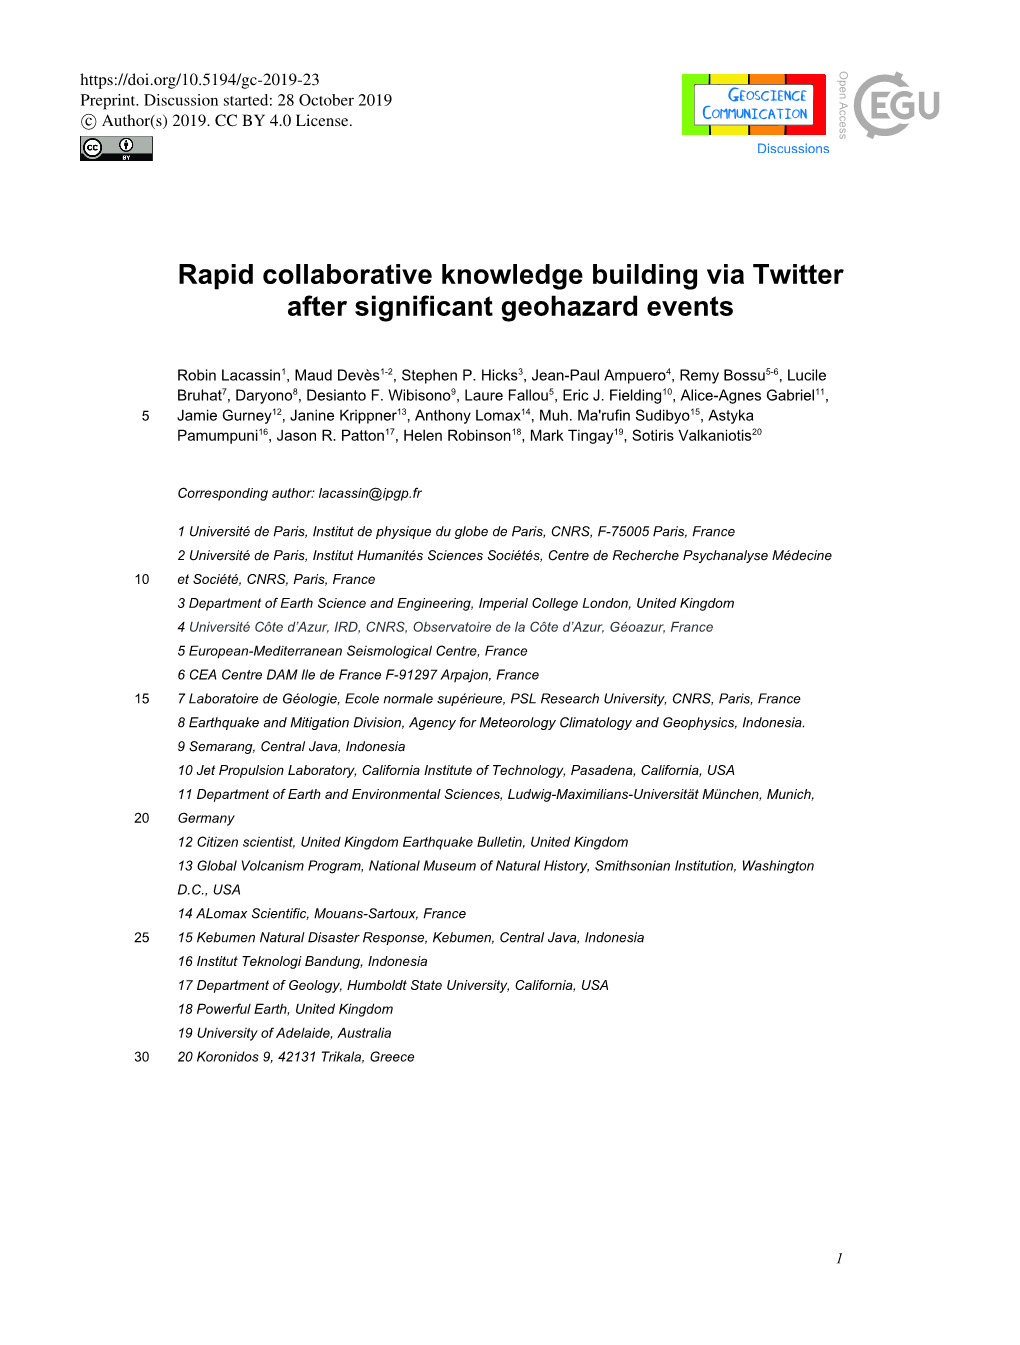 Rapid Collaborative Knowledge Building Via Twitter After Significant Geohazard Events